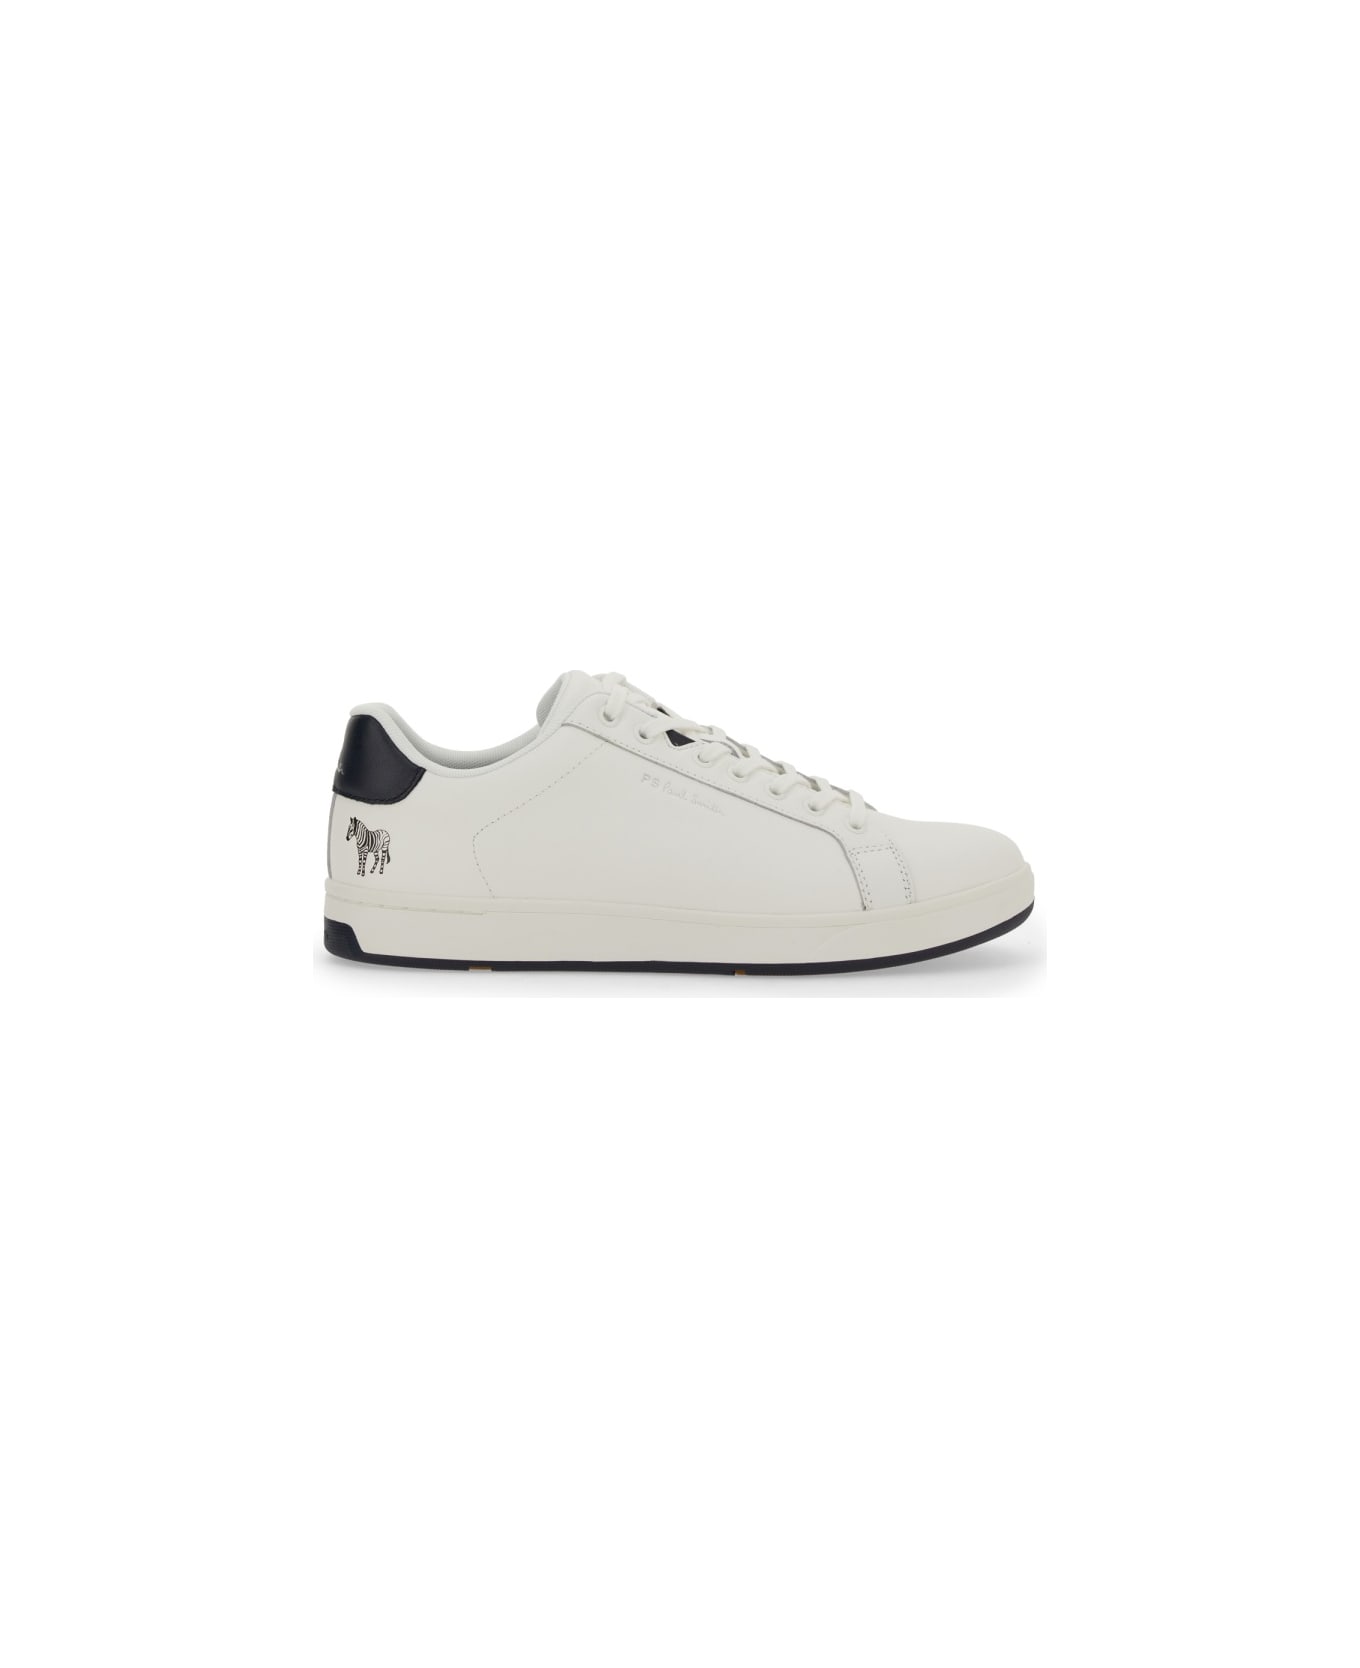 PS by Paul Smith "albany" Sneaker - WHITE